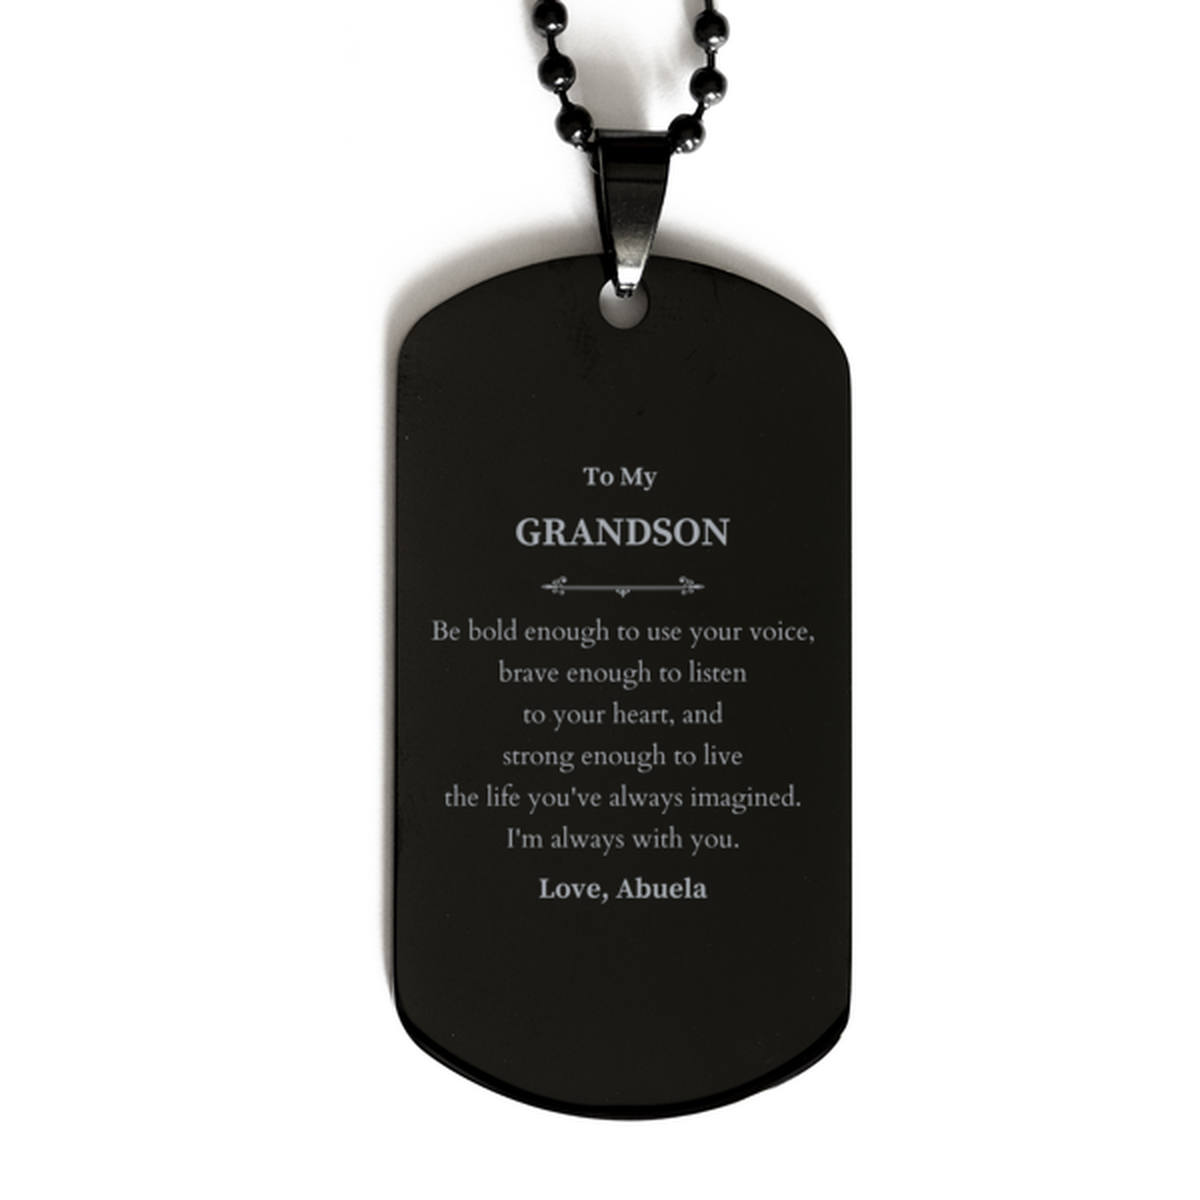 Keepsake Grandson Black Dog Tag Gift Idea Graduation Christmas Birthday Grandson from Abuela, Grandson Be bold enough to use your voice, brave enough to listen to your heart. Love, Abuela